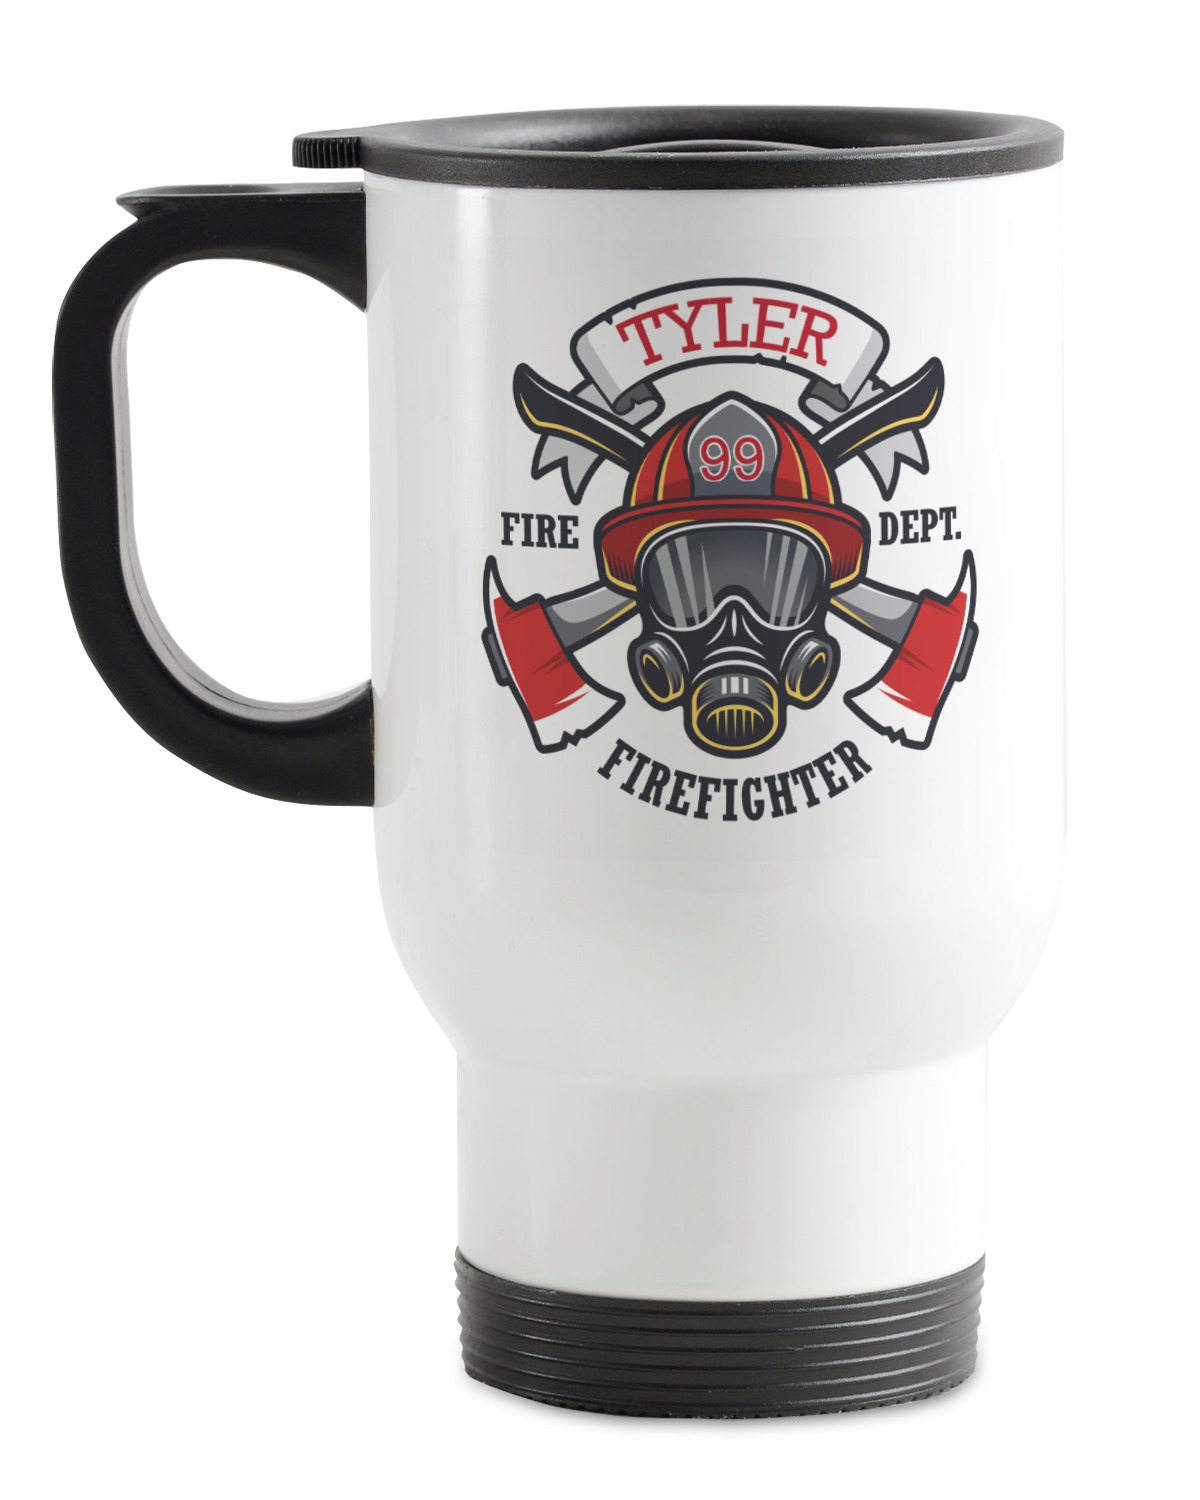 https://www.youcustomizeit.com/common/MAKE/1960007/Firefighter-Career-Stainless-Steel-Travel-Mug-with-Handle.jpg?lm=1670304322